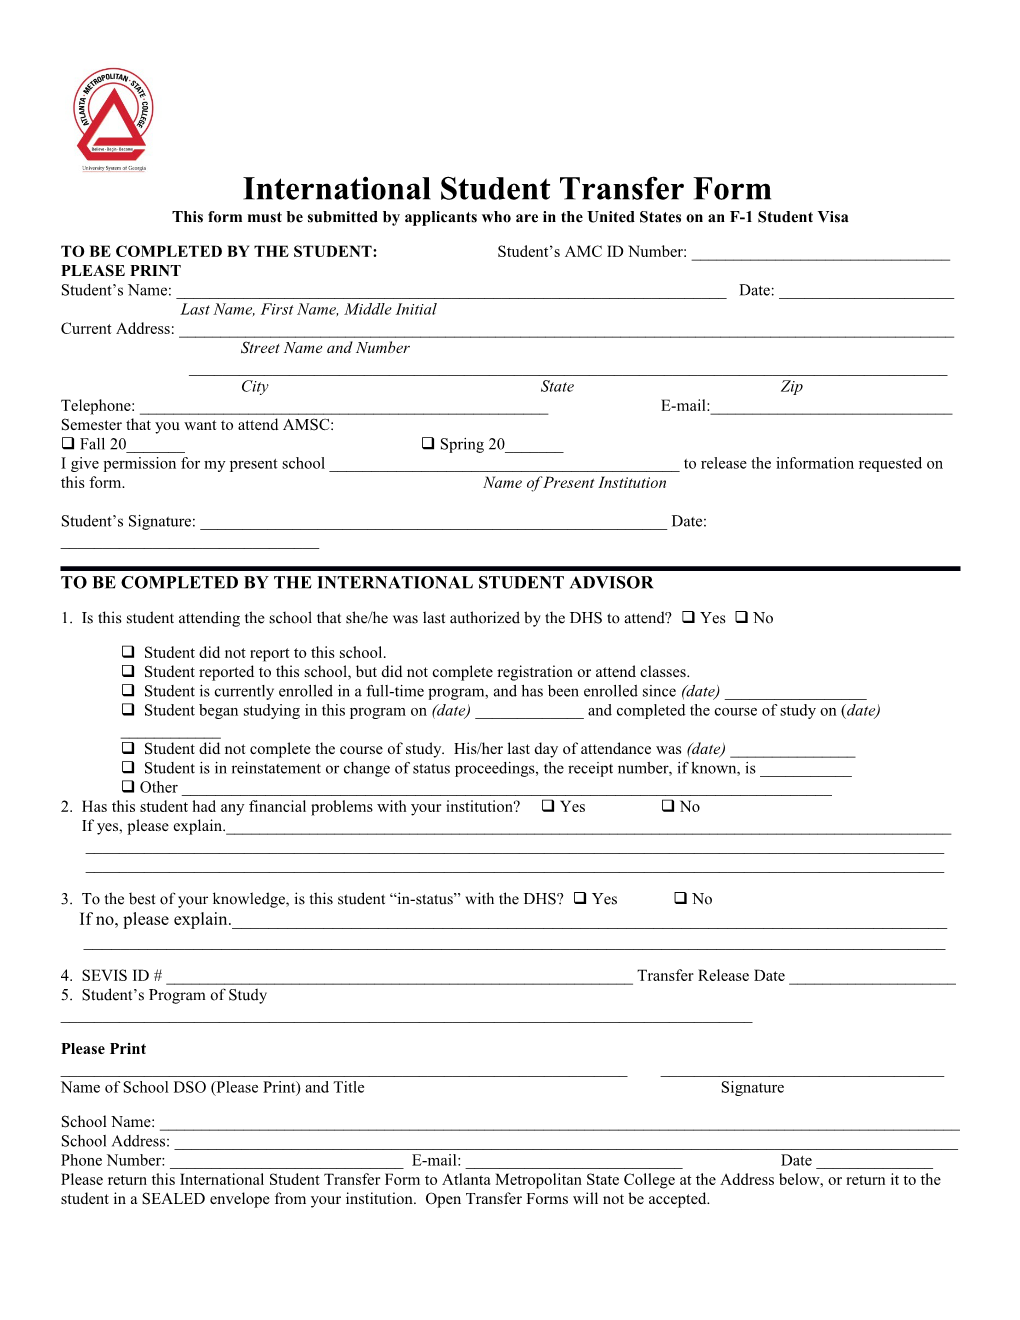 This Form Must Be Submitted by Applicants Who Are in the United States on an F-1 Student Visa